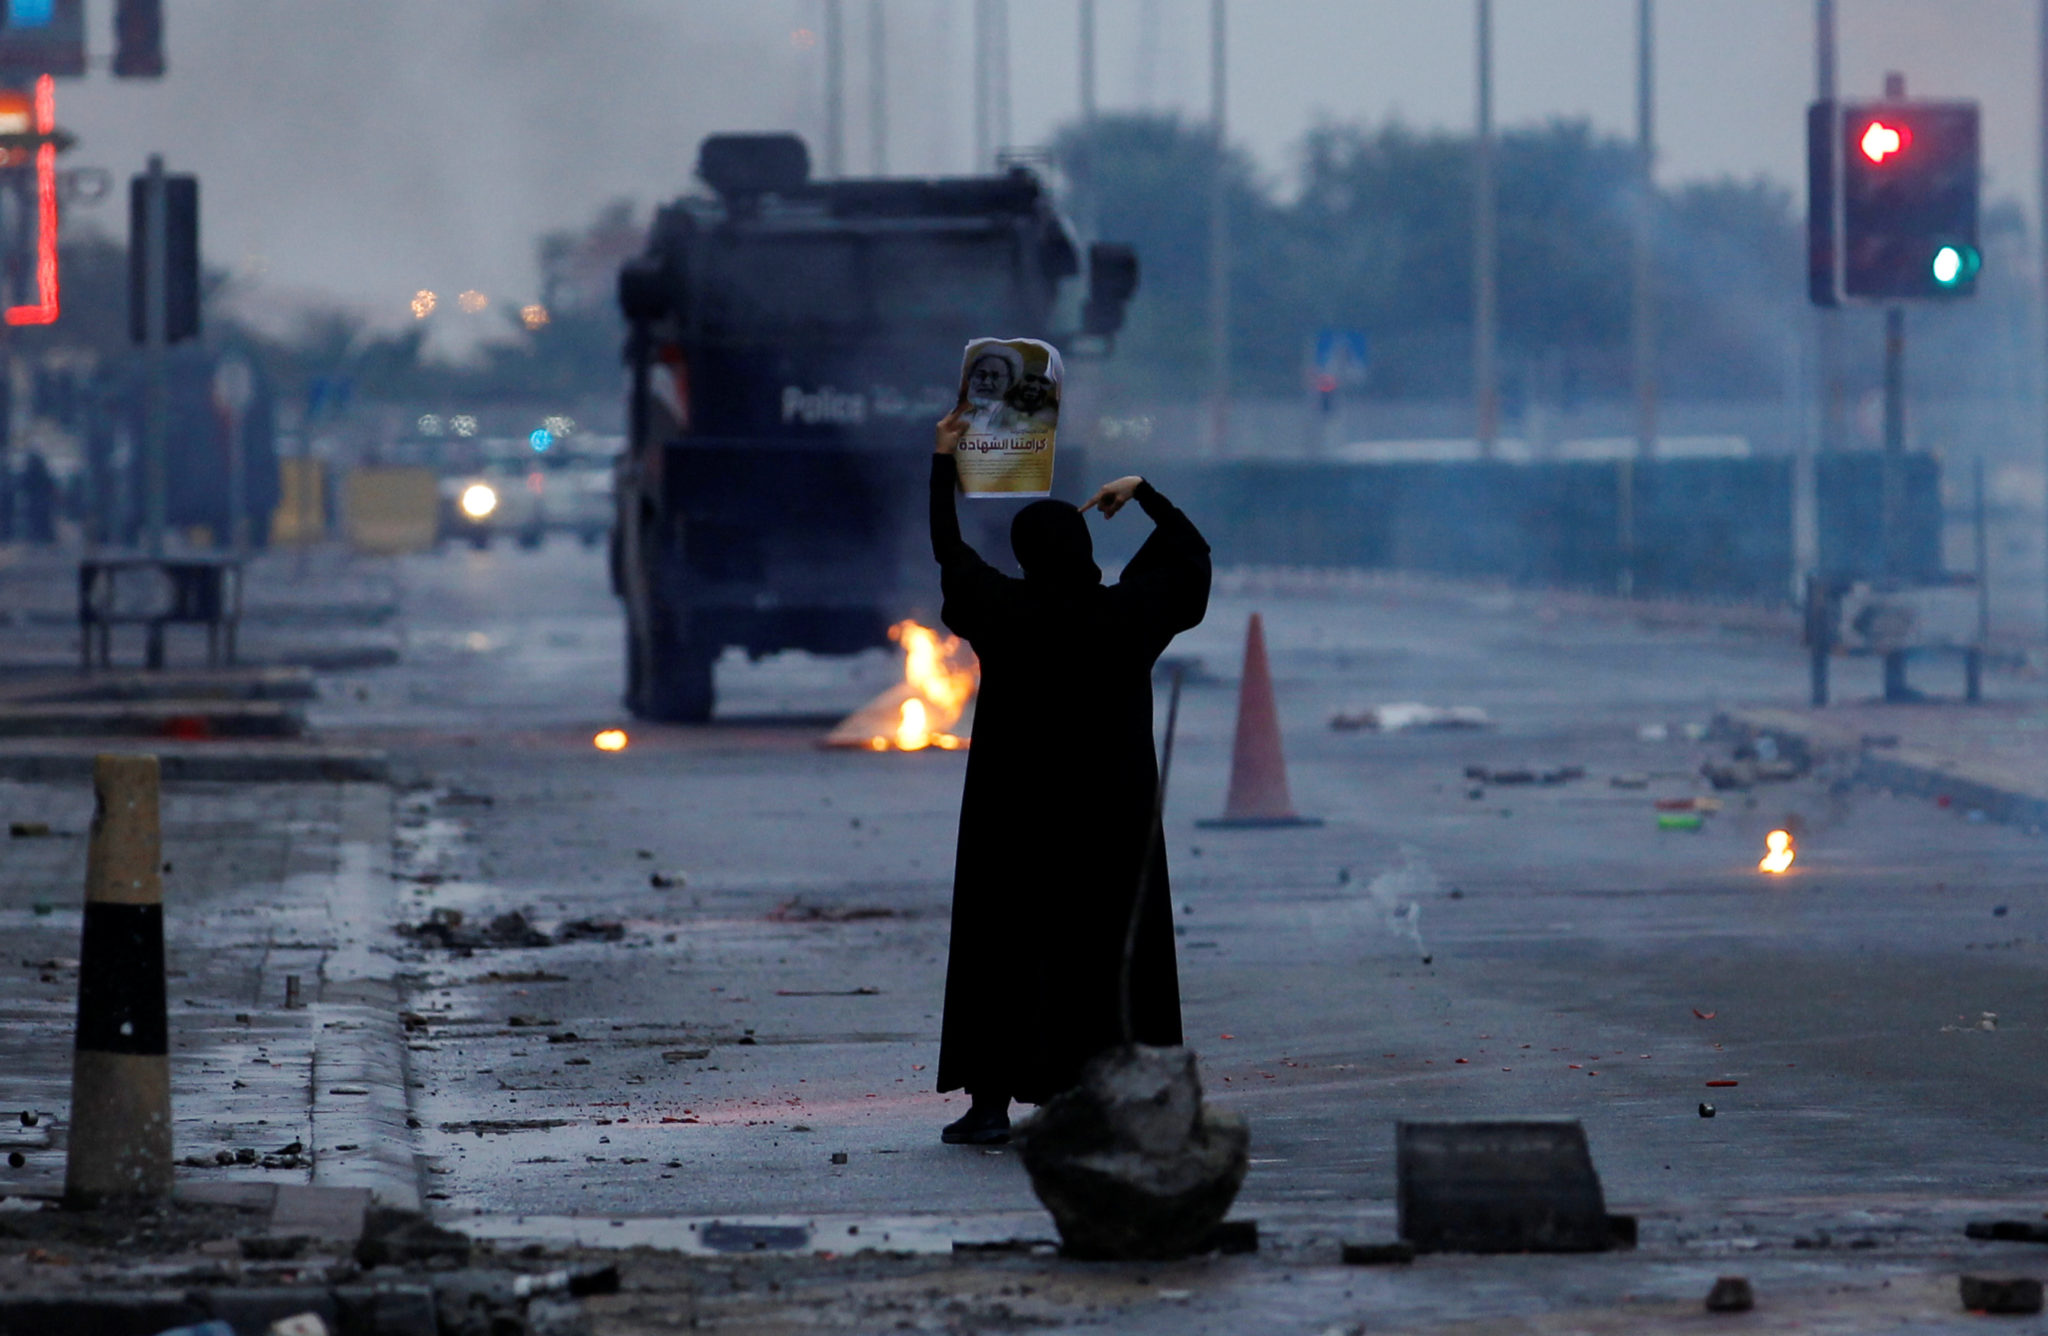 Bahrain: A year of brutal government repression to crush dissent